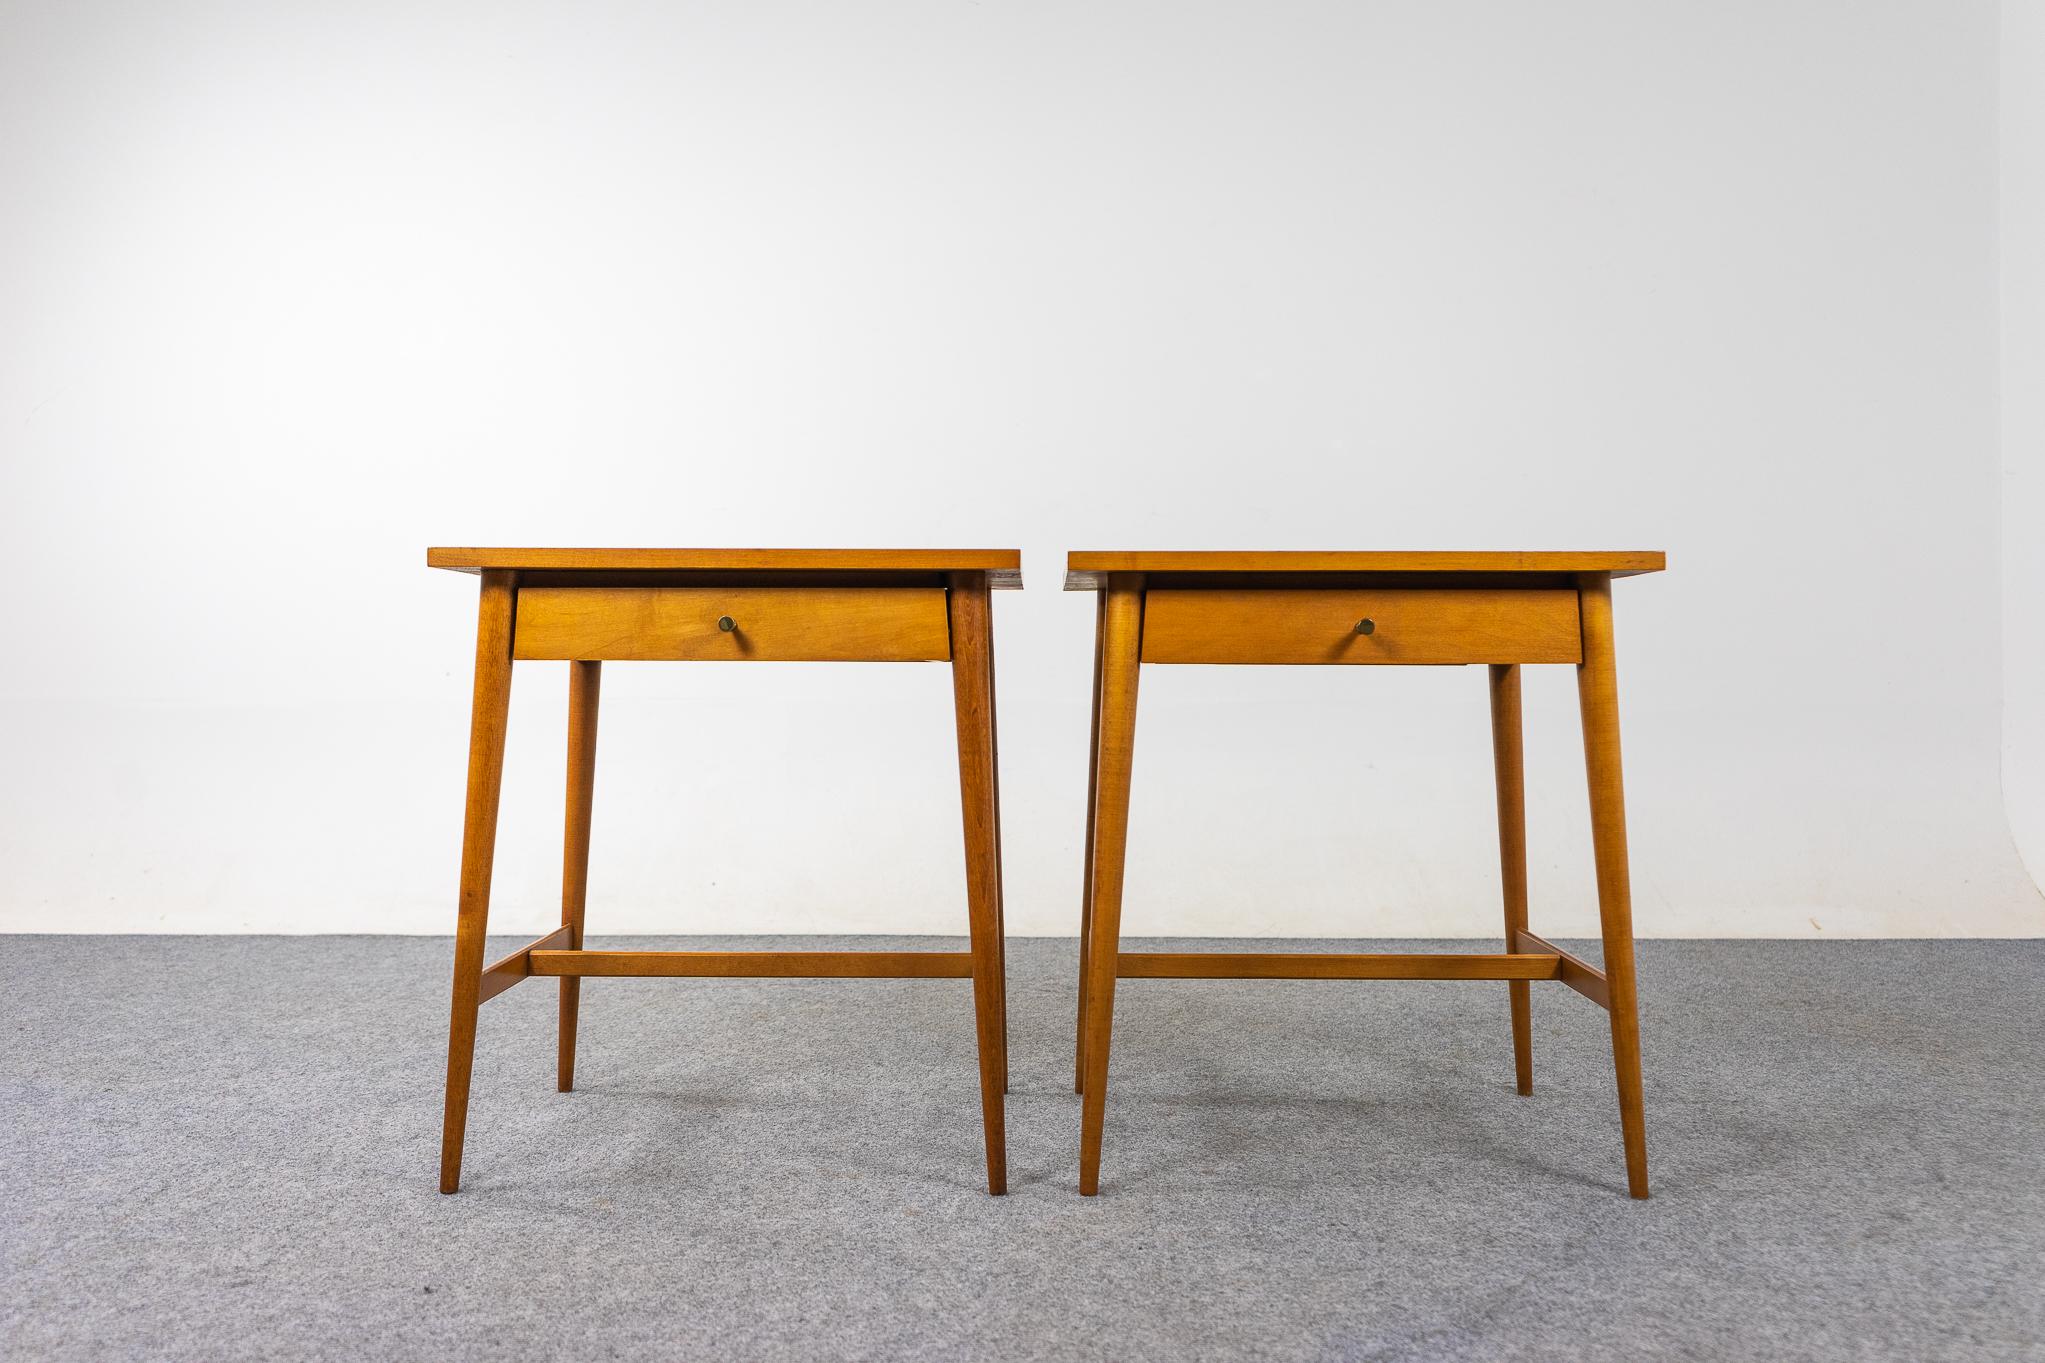 Maple American mid-century bedside tables by Paul McCobb, circa 1950's. Elegant, sleek tables with slender, tapered legs. Slim drawers with metal pulls, keep your evening essentials close at hand. Finished backs make them perfectly suited for use as